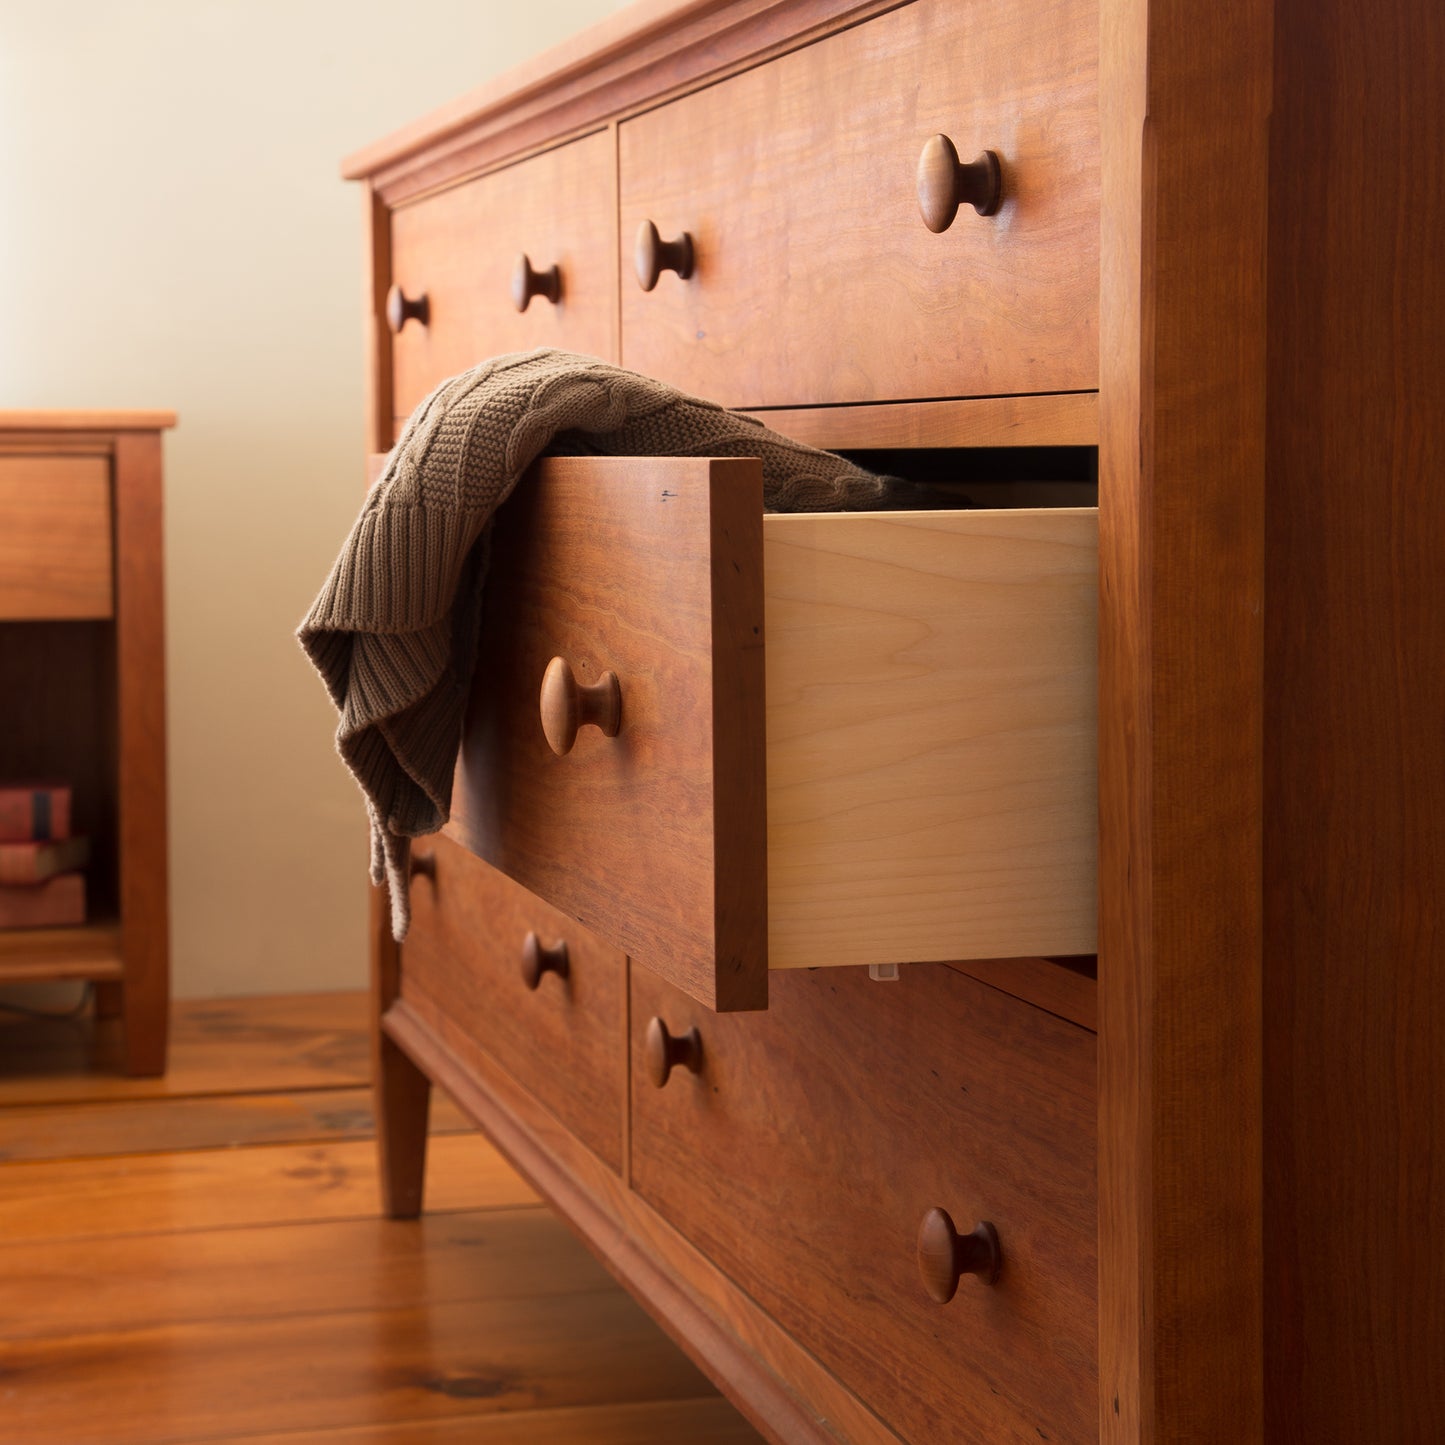 A sturdy Vermont Shaker 6-Drawer Dresser from Maple Corner Woodworks with one open drawer revealing its contents, with a folded grey blanket draped partially out of it, set against a soft background.